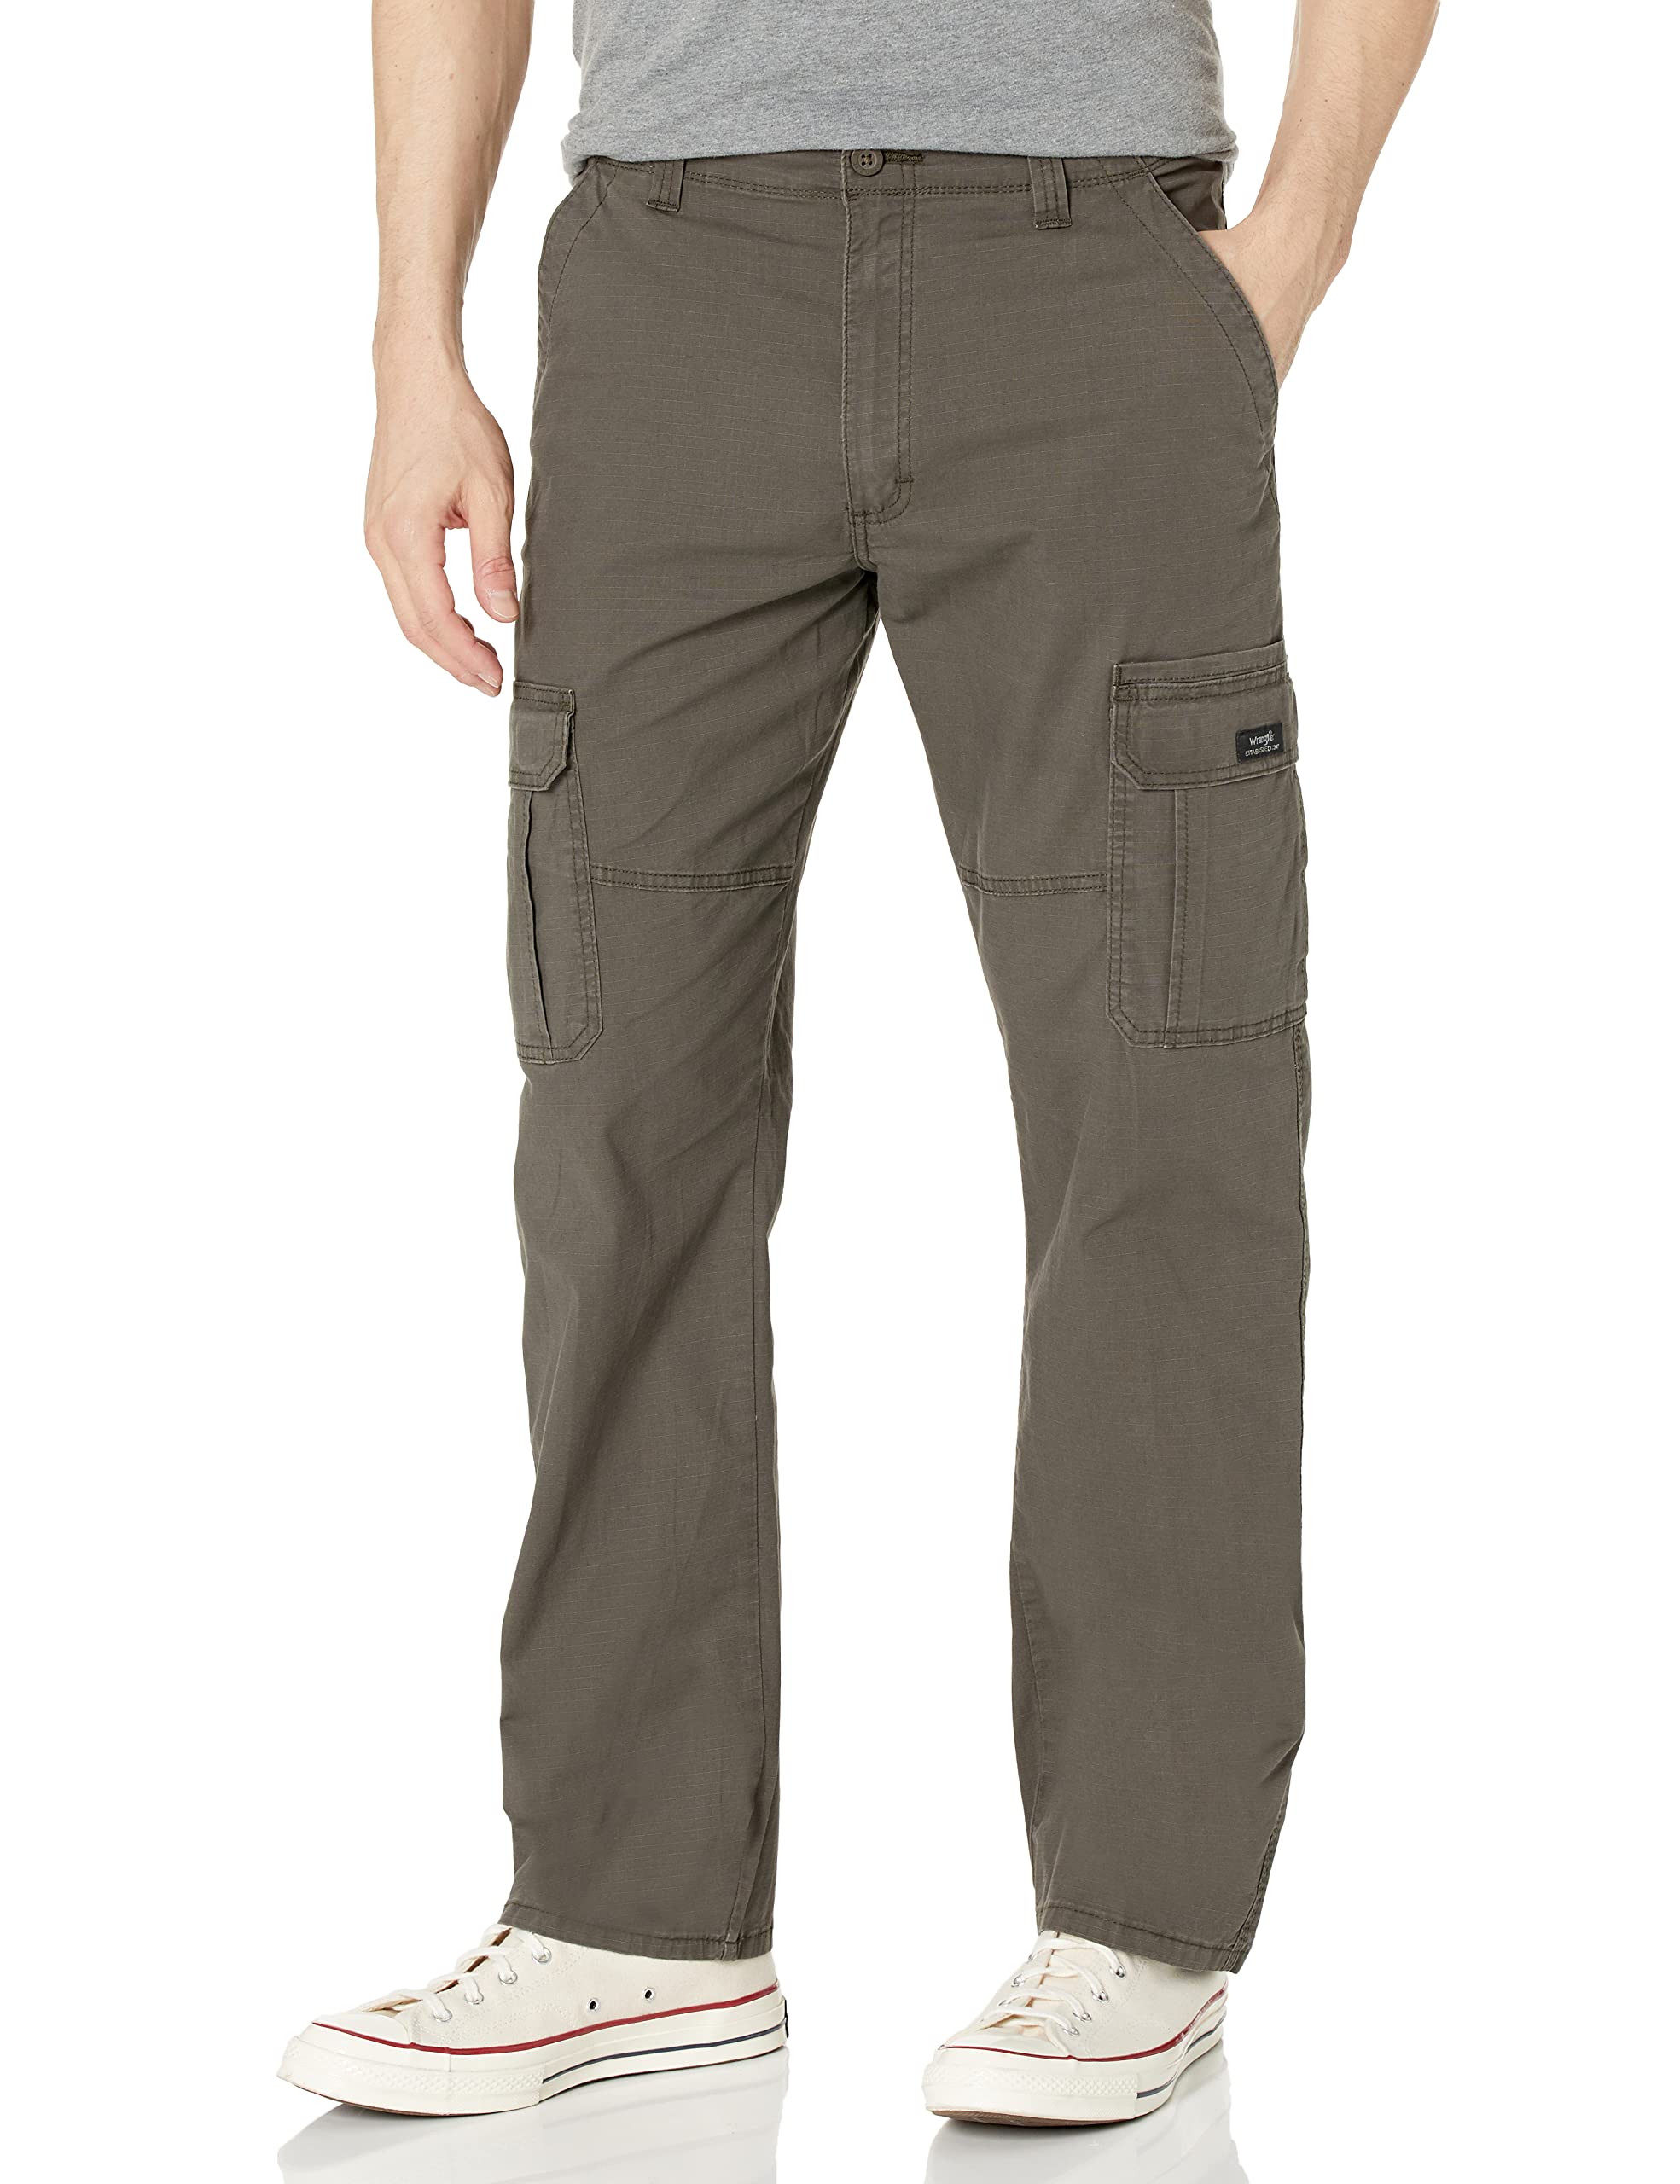 Wrangler Authentics mens Regular Tapered Cargo Pants, Brushed Almond, 29W x  30L US at Amazon Men's Clothing store